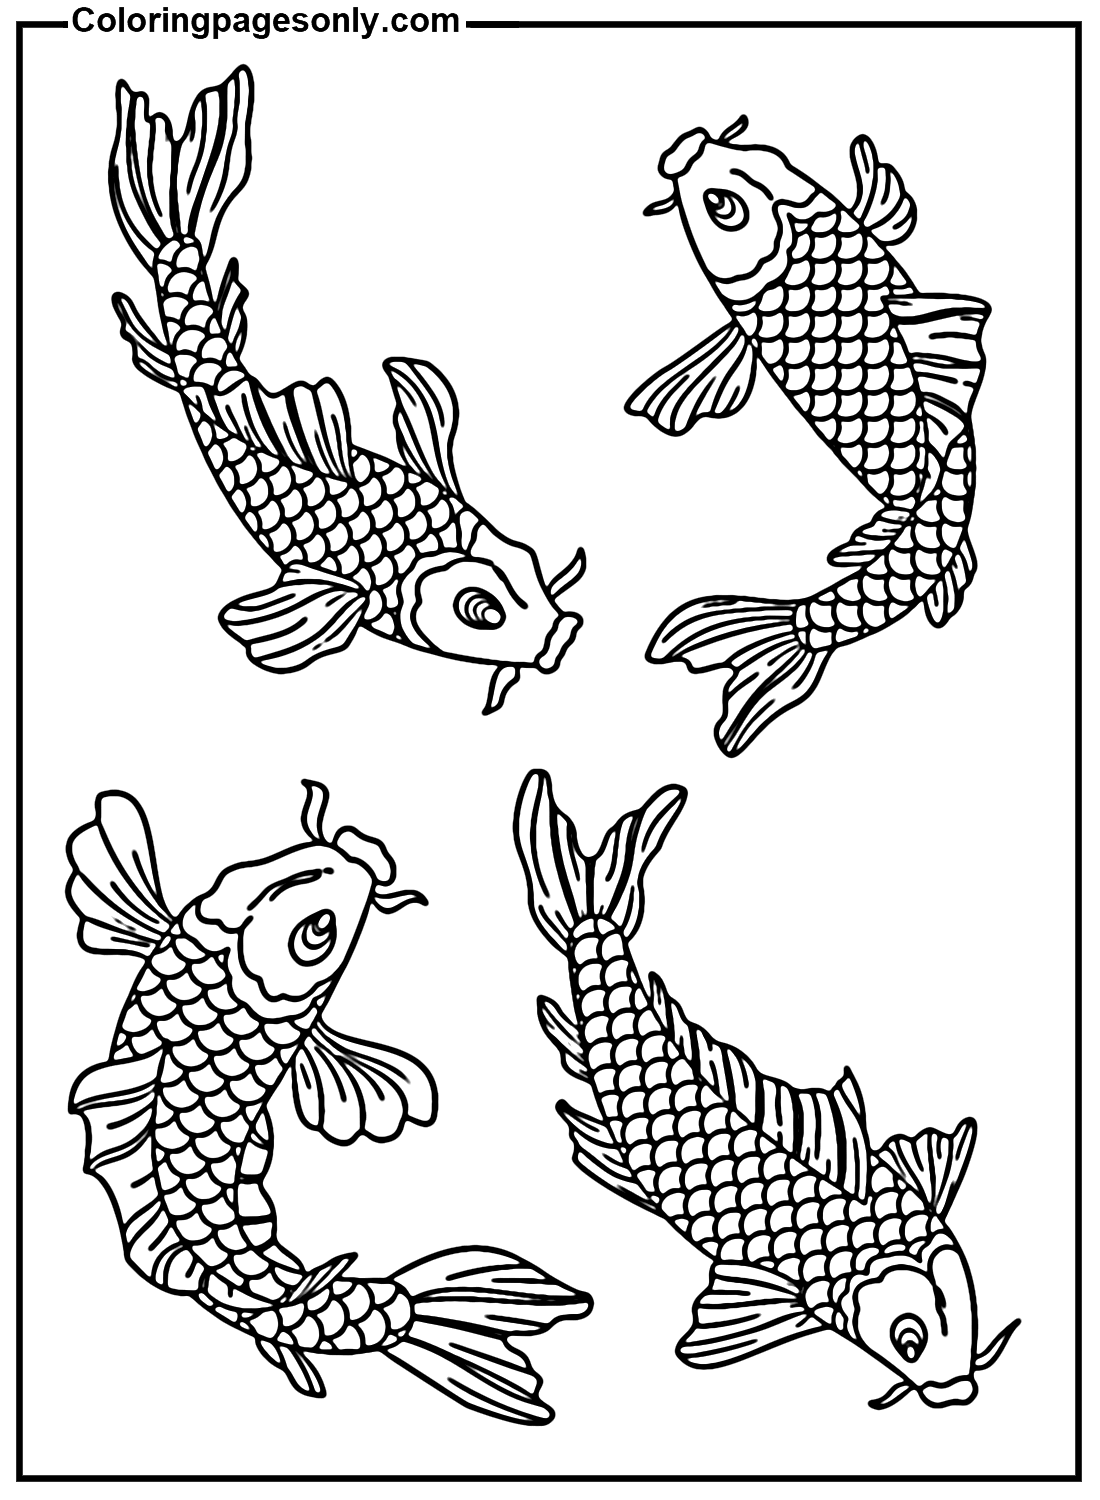 Koi Fish In A Tank Coloring Pages